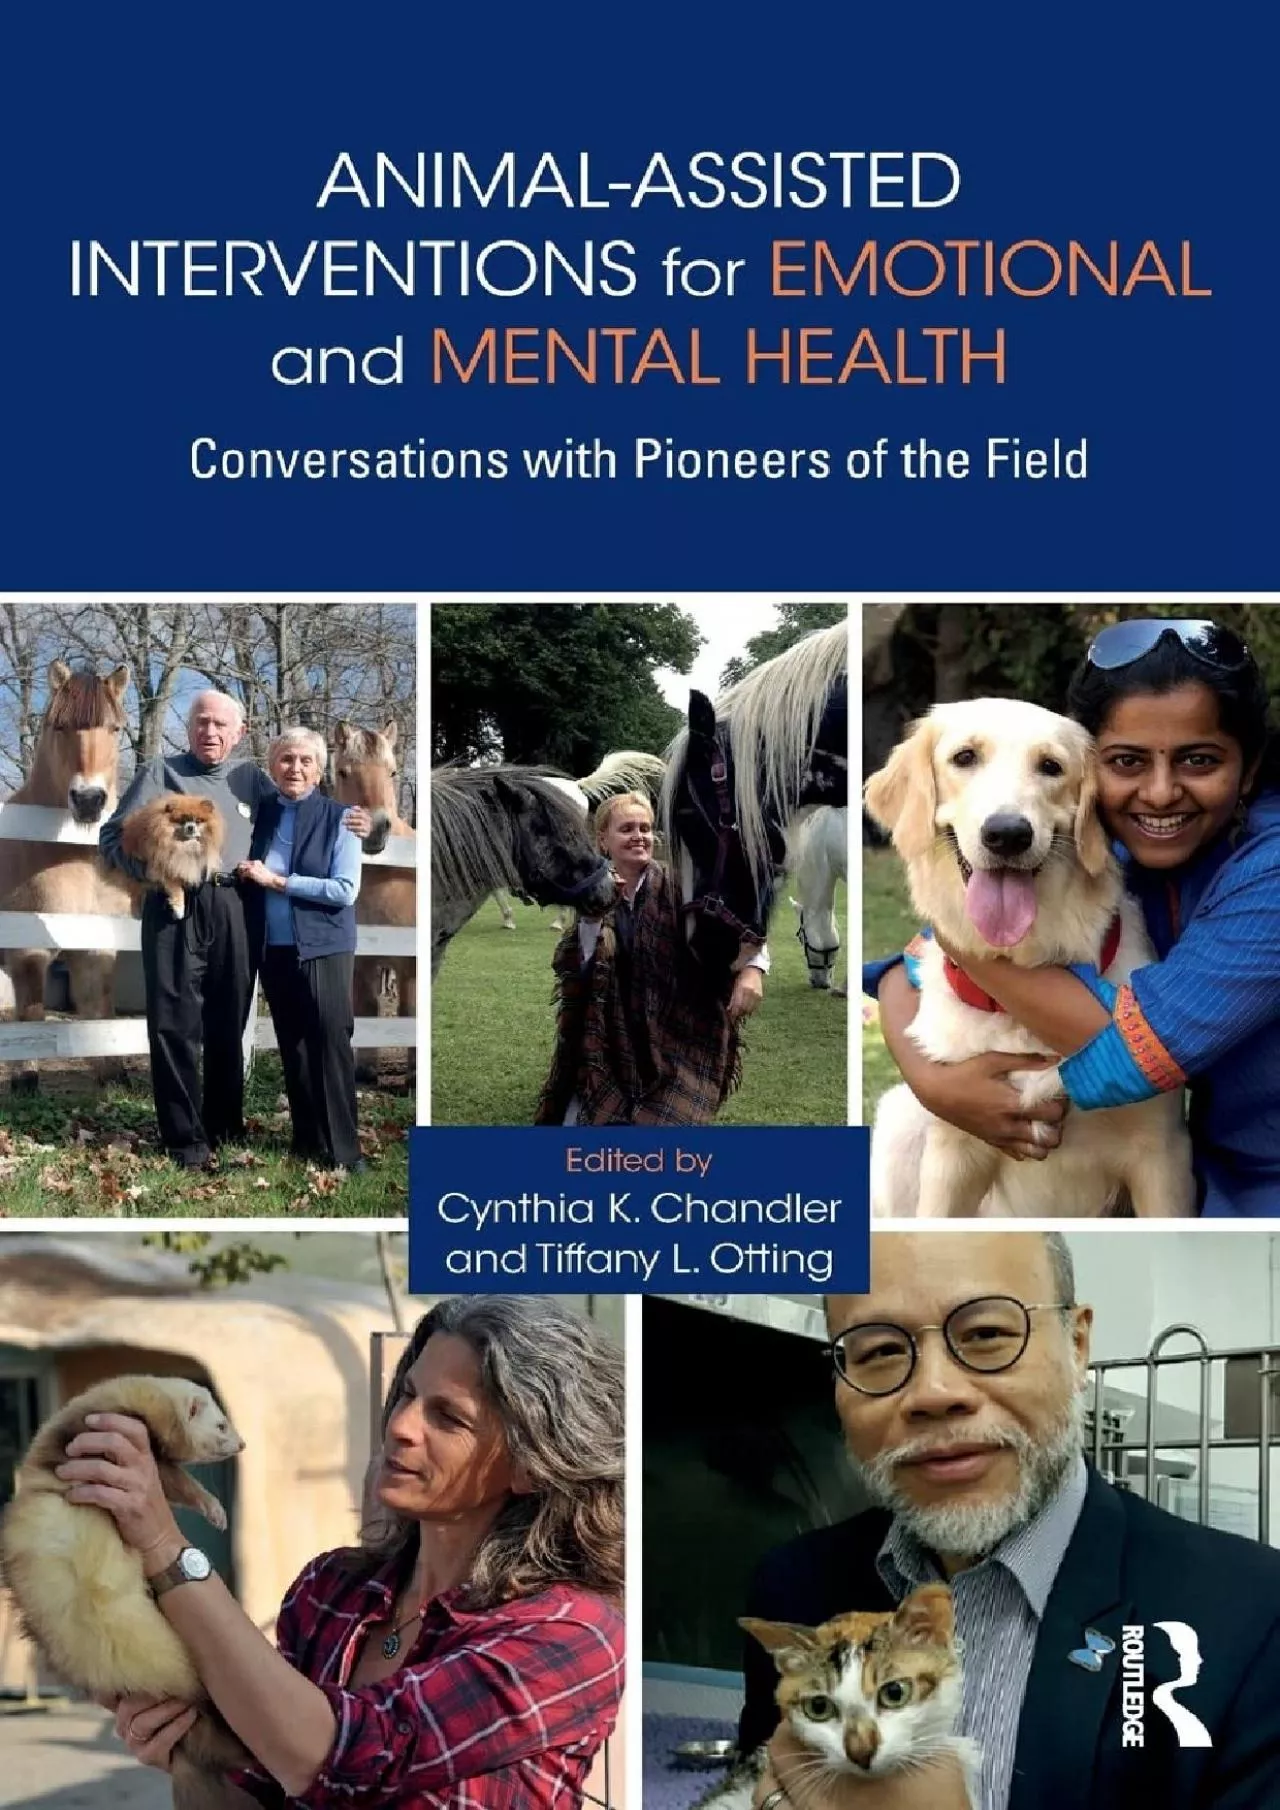 (DOWNLOAD)-Animal-Assisted Interventions for Emotional and Mental Health: Conversations